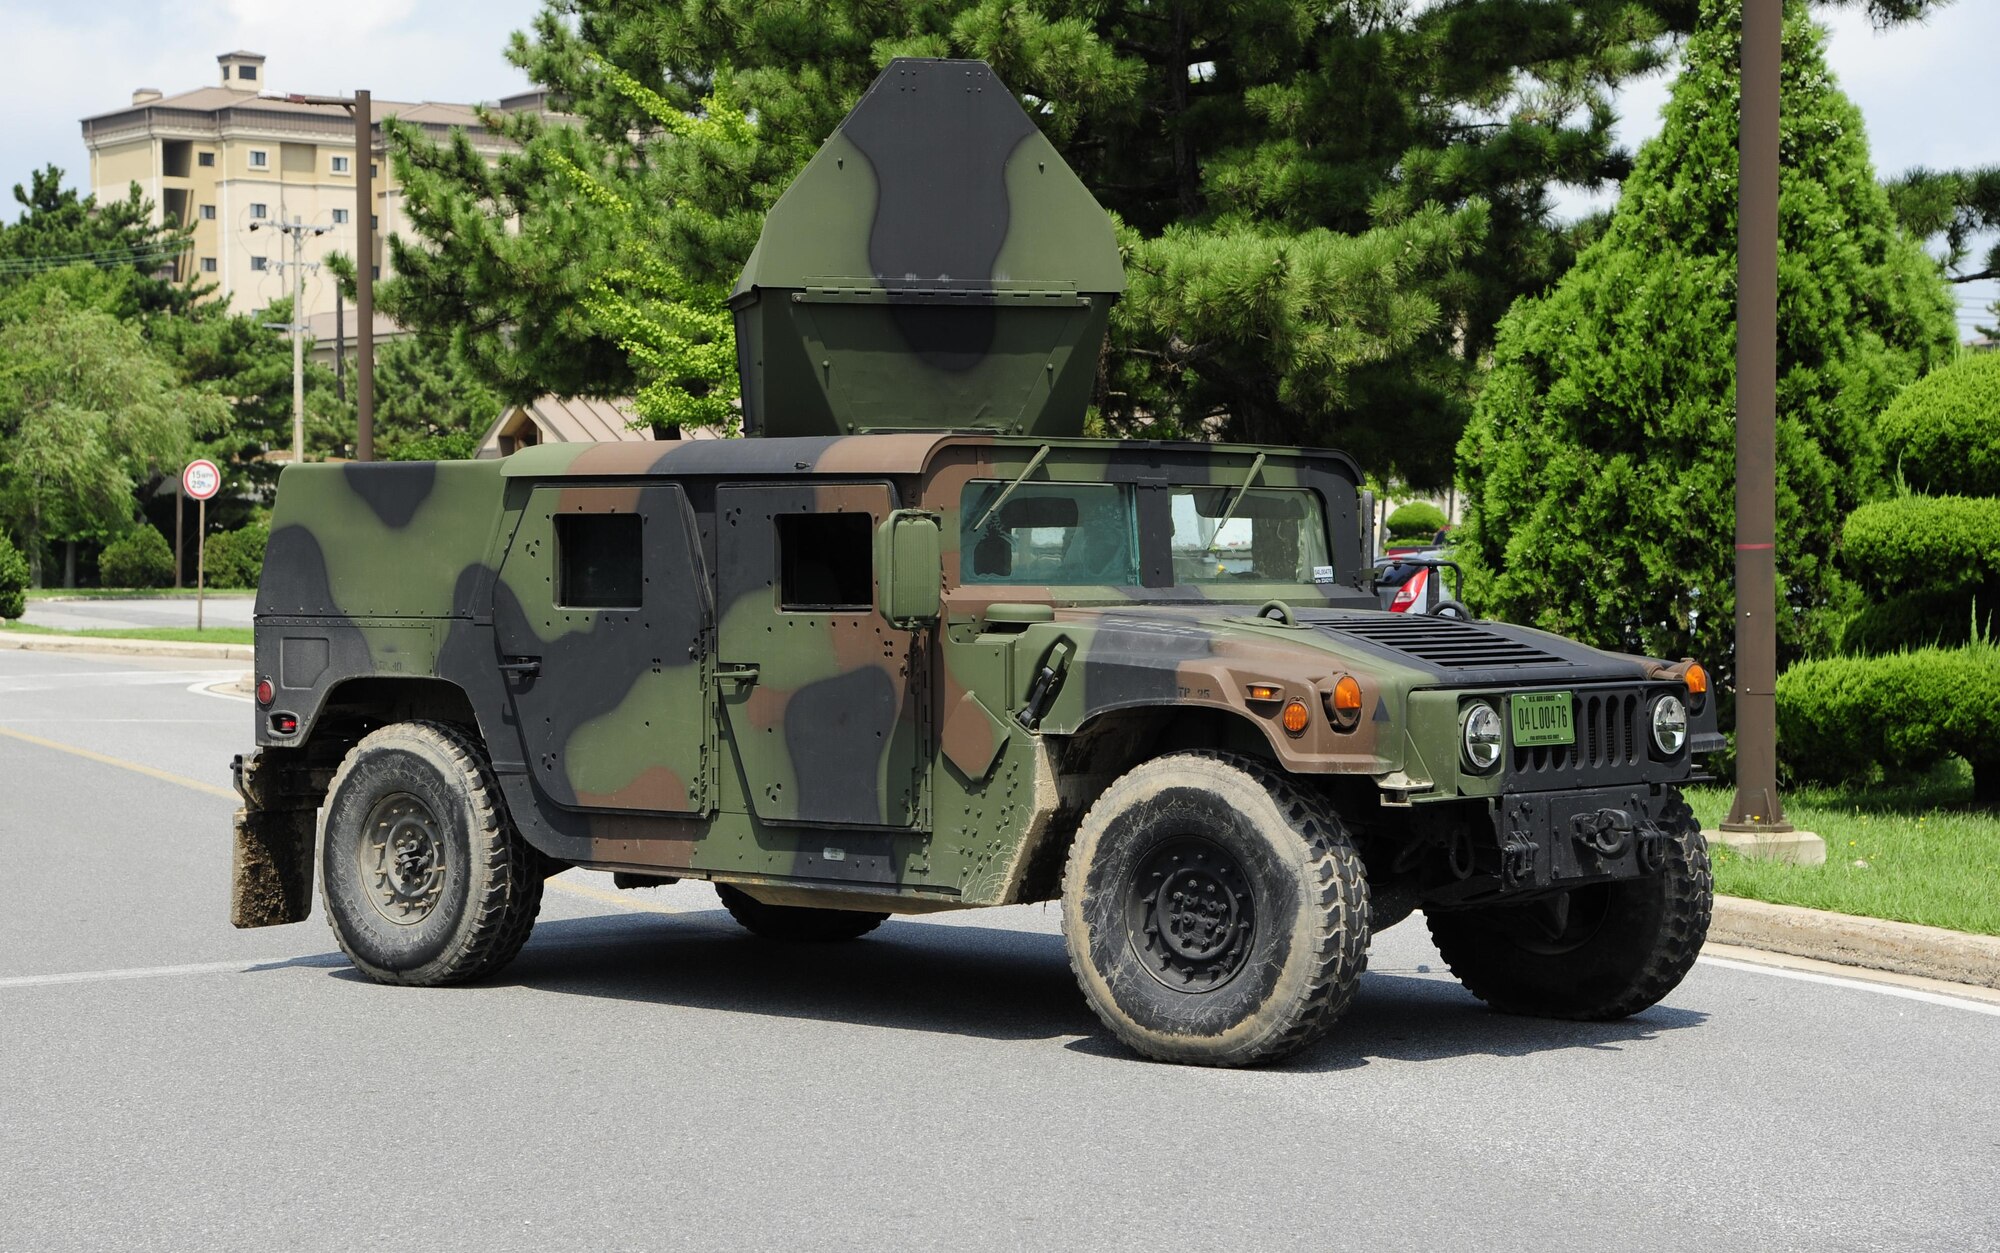 An U.S. Air Force 8th Security Forces Squadron Humvee sits in an intersection during the regularly scheduled training exercise, Beverly Pack 17-3, at Kunsan Air Base, Republic of Korea, Aug. 22, 2017. Security Forces Airmen used the Humvee as a road block to stop oncoming traffic from entering a restricted area and keep people out of harm’s way during a suspicious package simulation. (U.S. Air Force photo by Senior Airman Colby L. Hardin/Released)